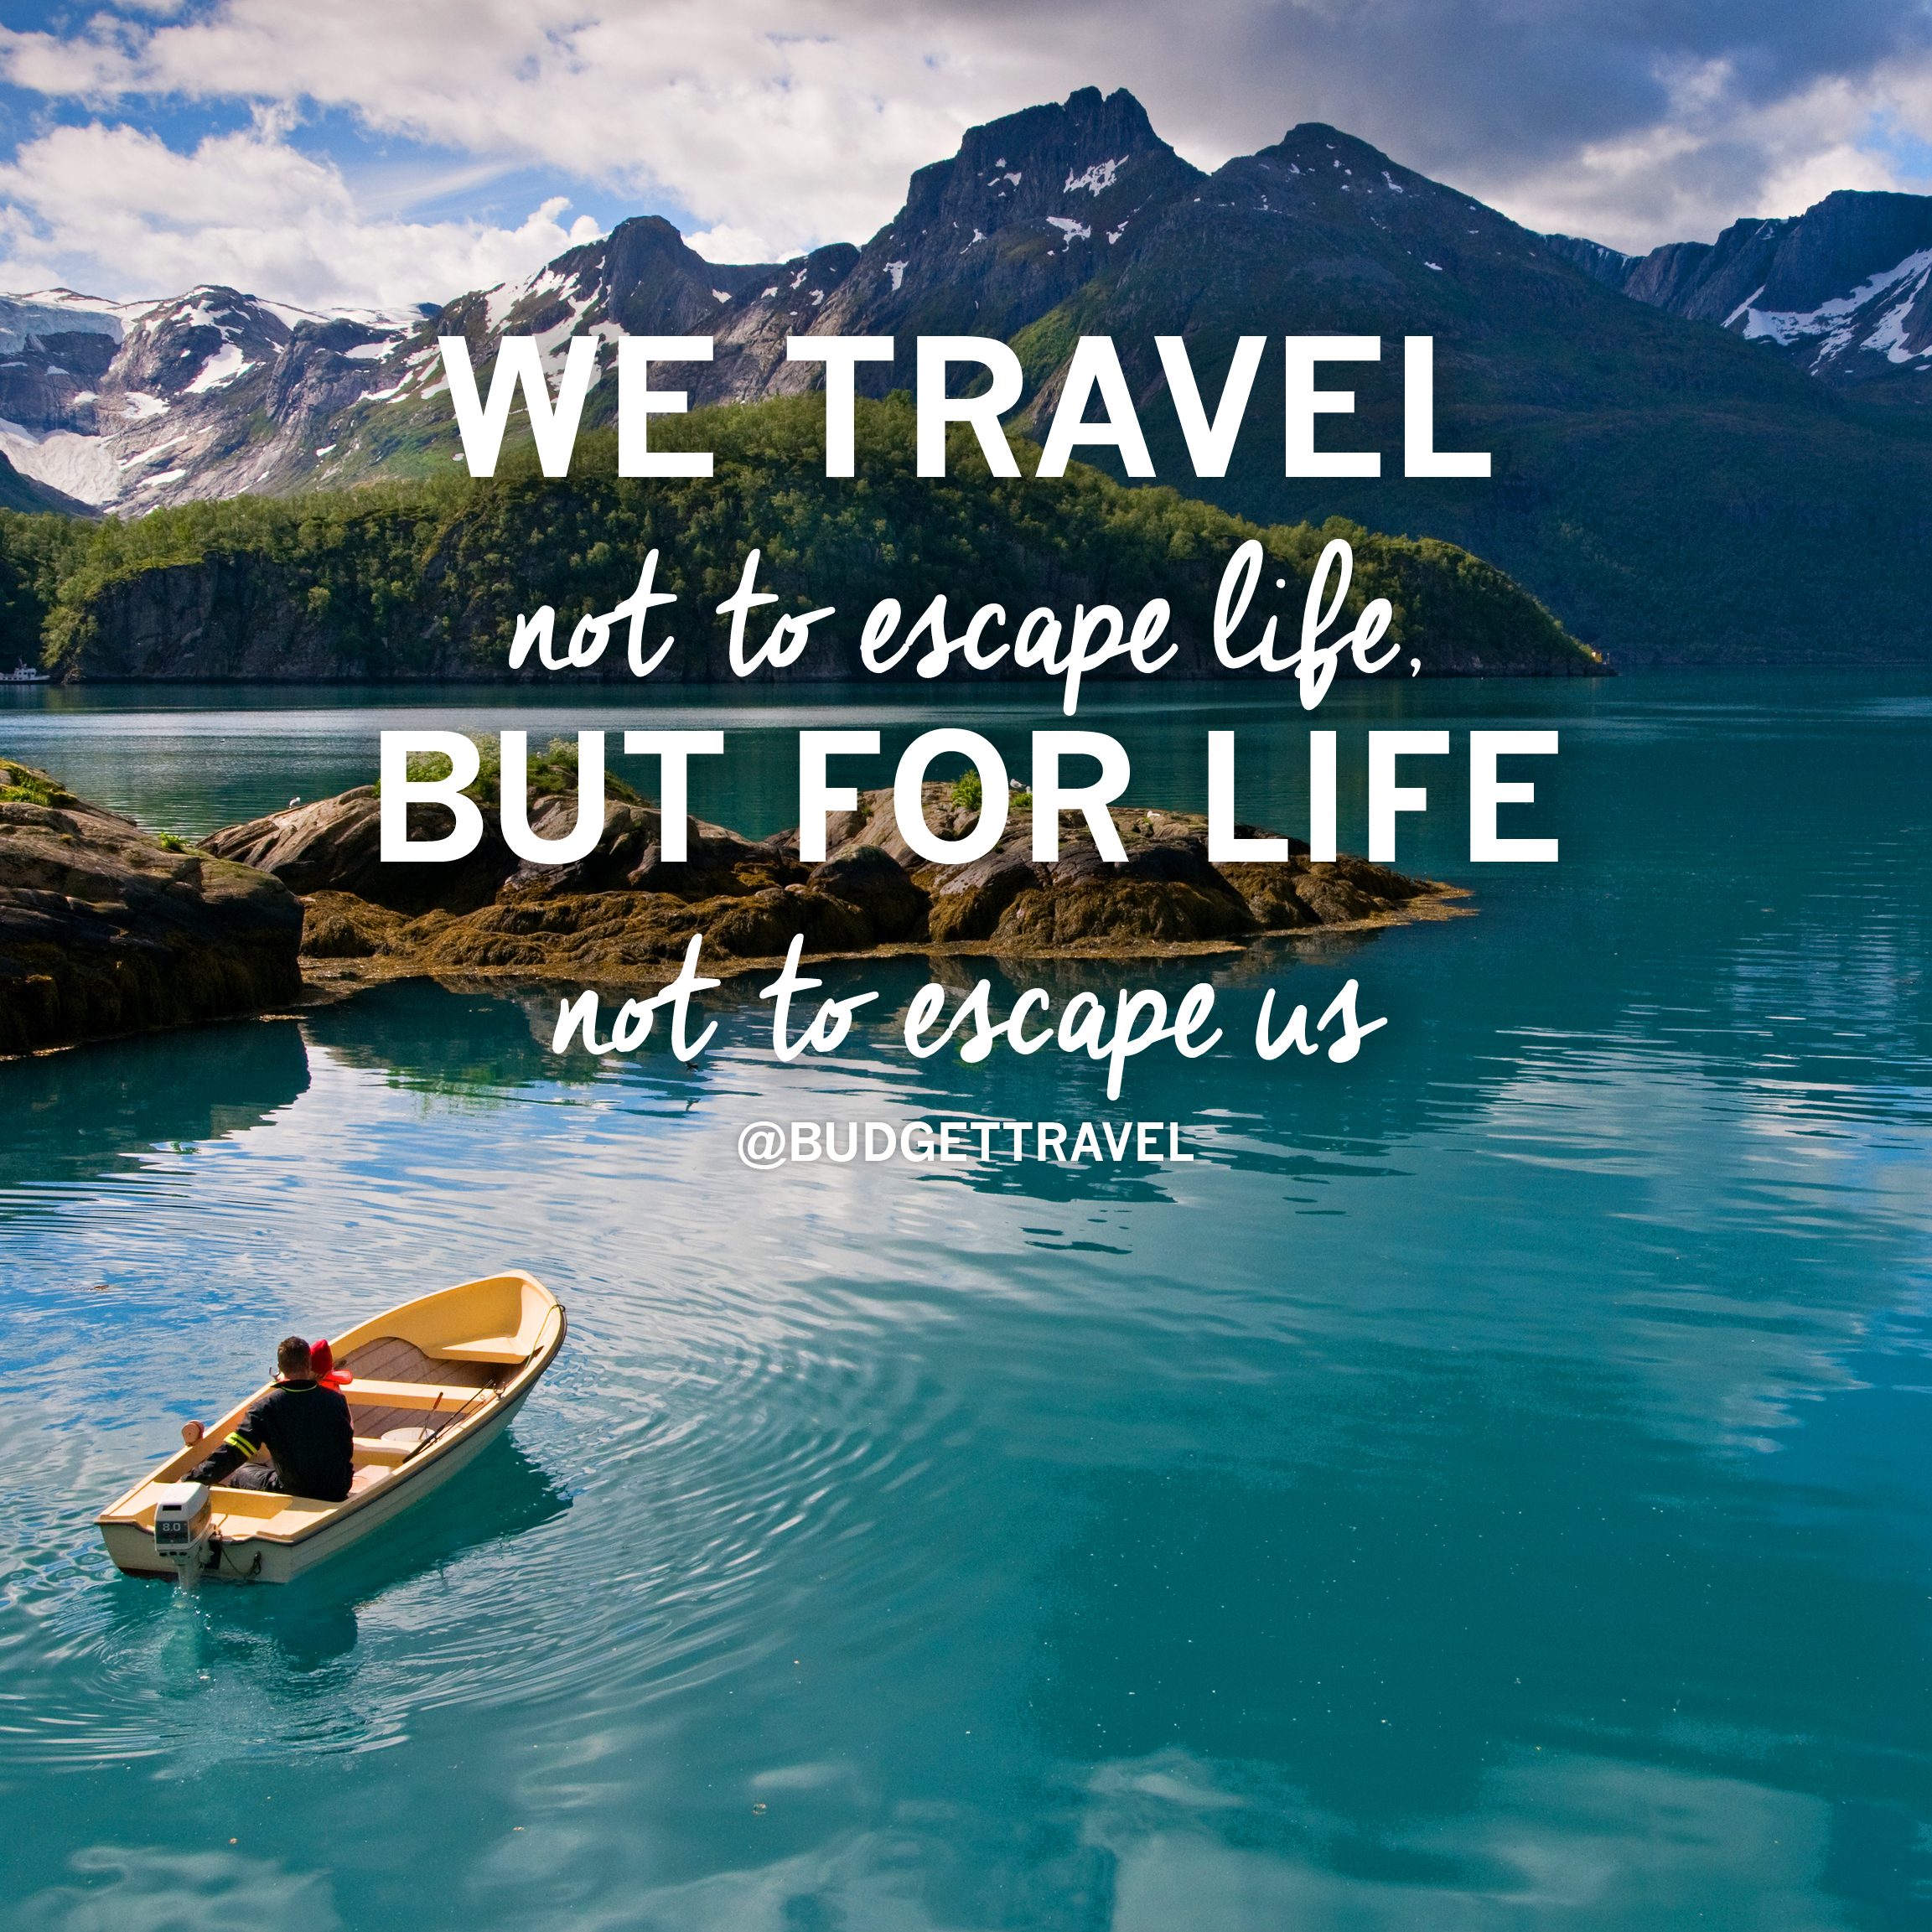 Quotes About Travel And Family Care